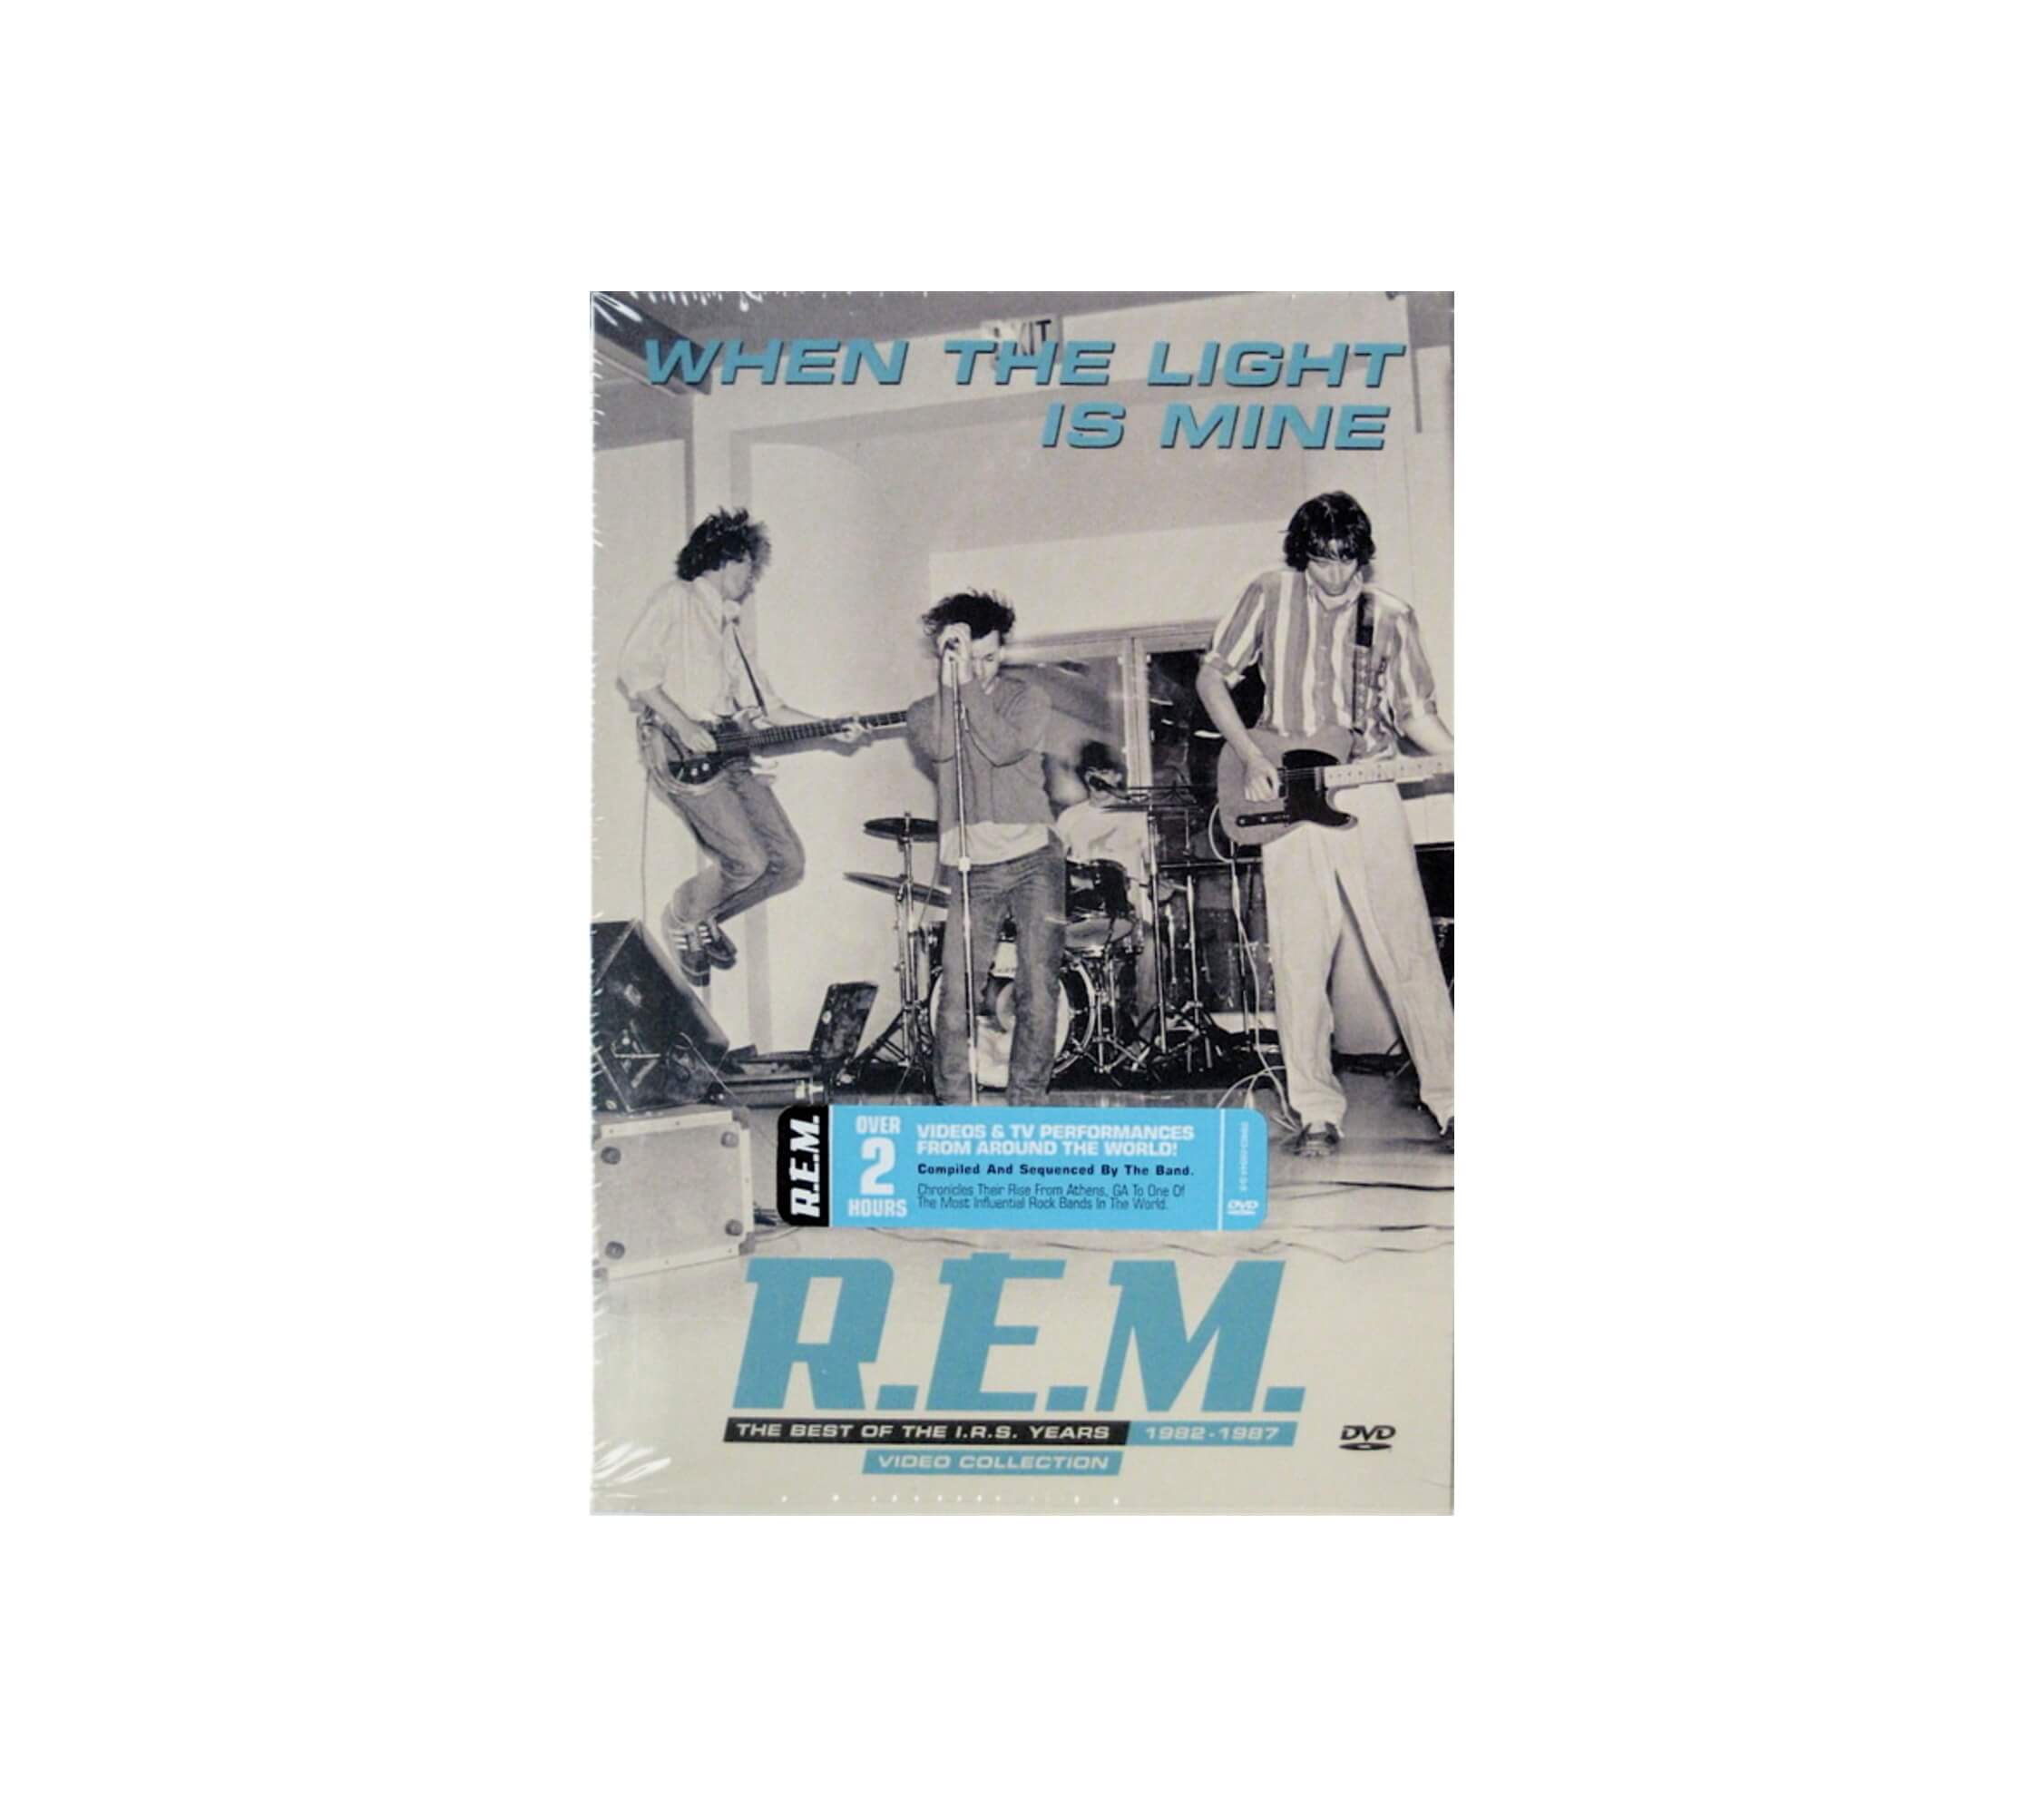 R.E.M. - When The Light Is Mine - The Best Of The I.R.S. Years 1982-1987 - Video Collection